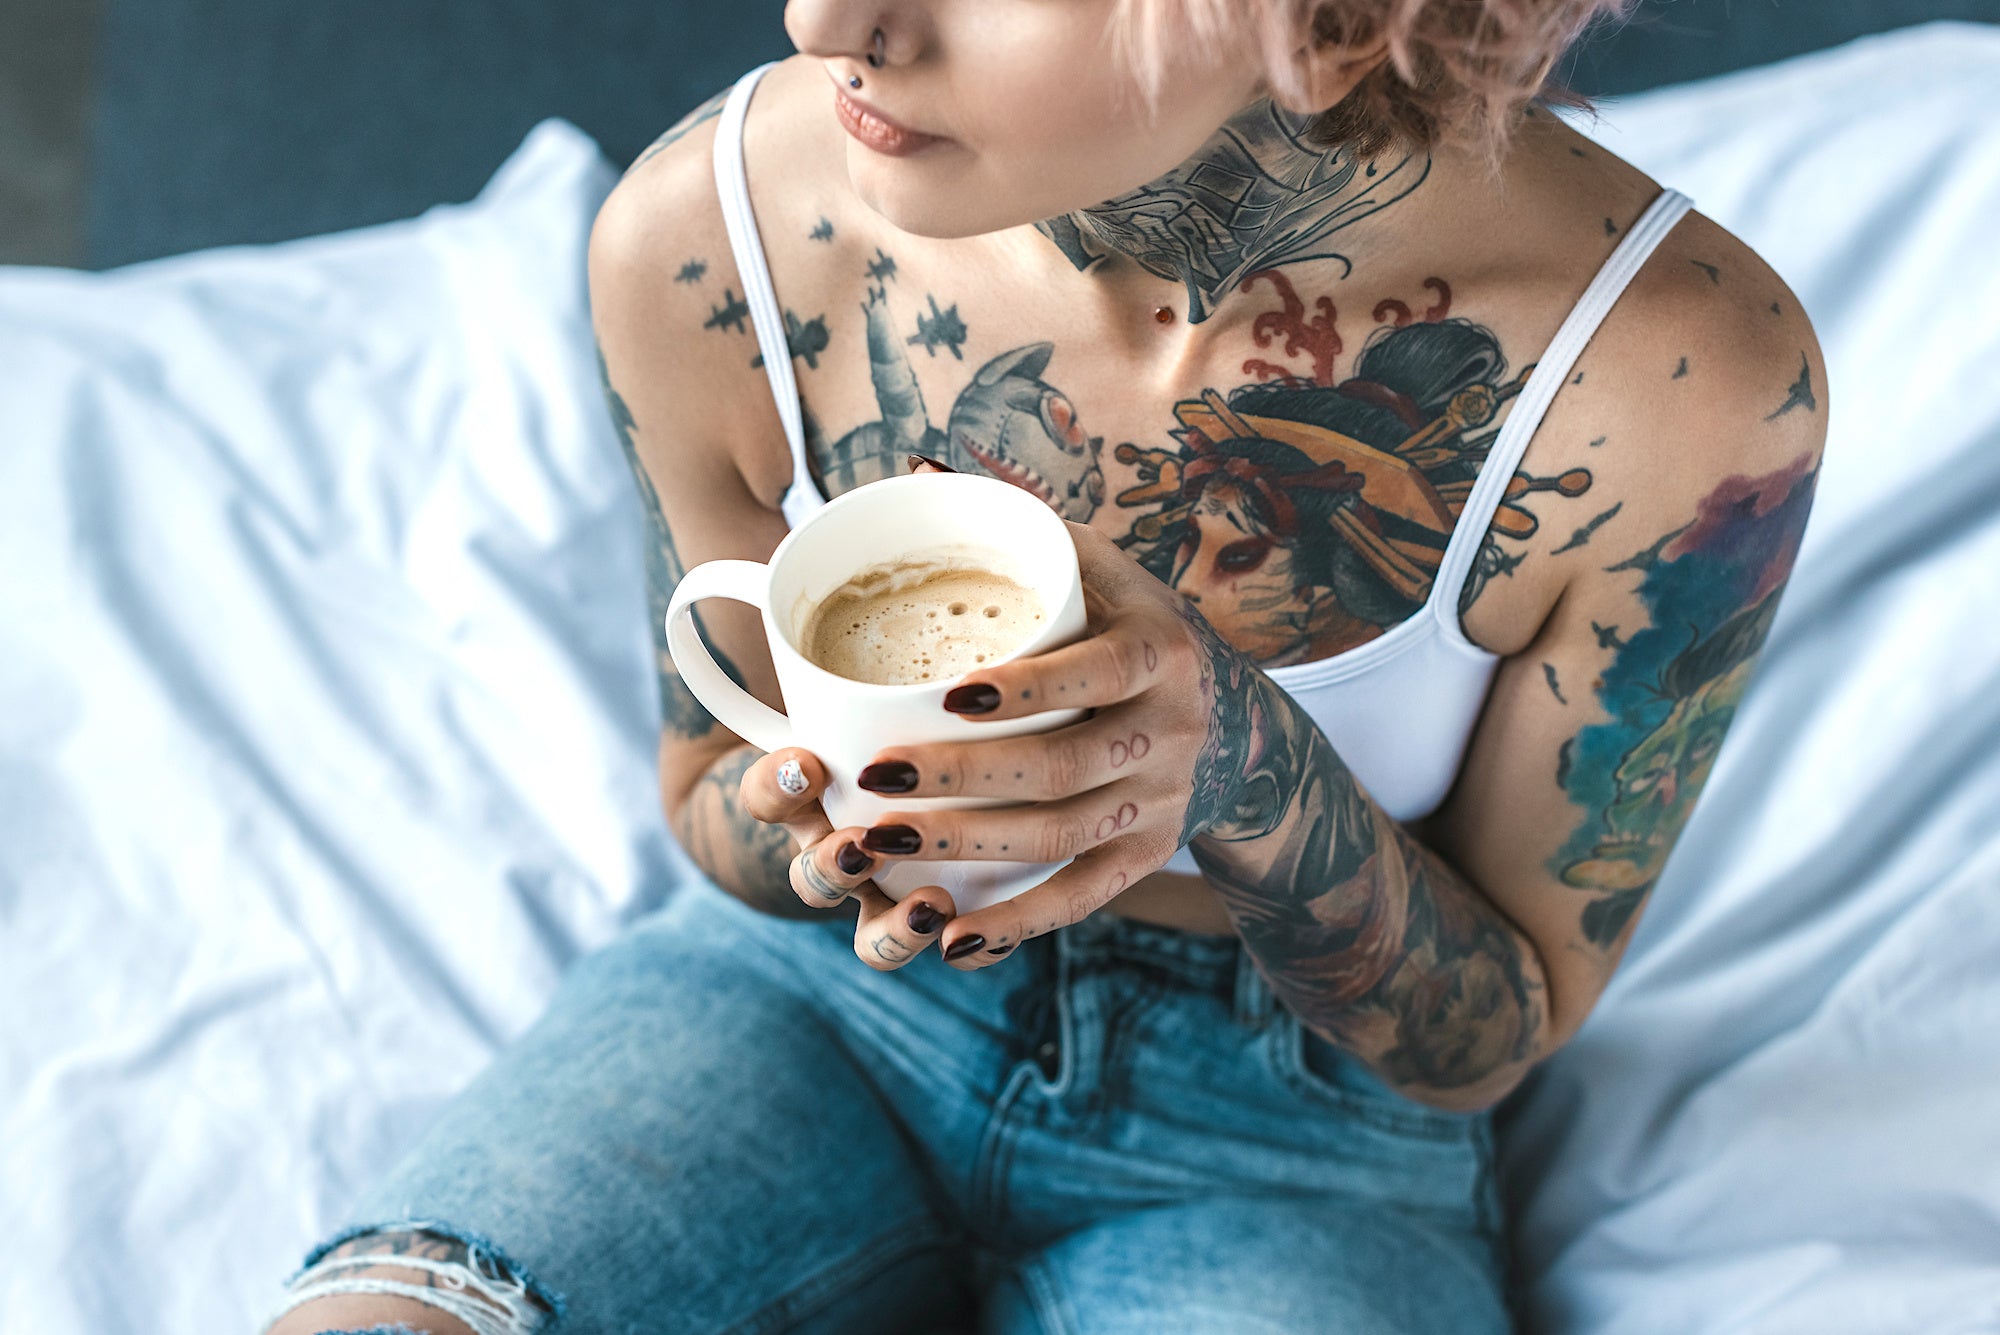 Beautiful woman with tattoos enjoys a cup of coffee